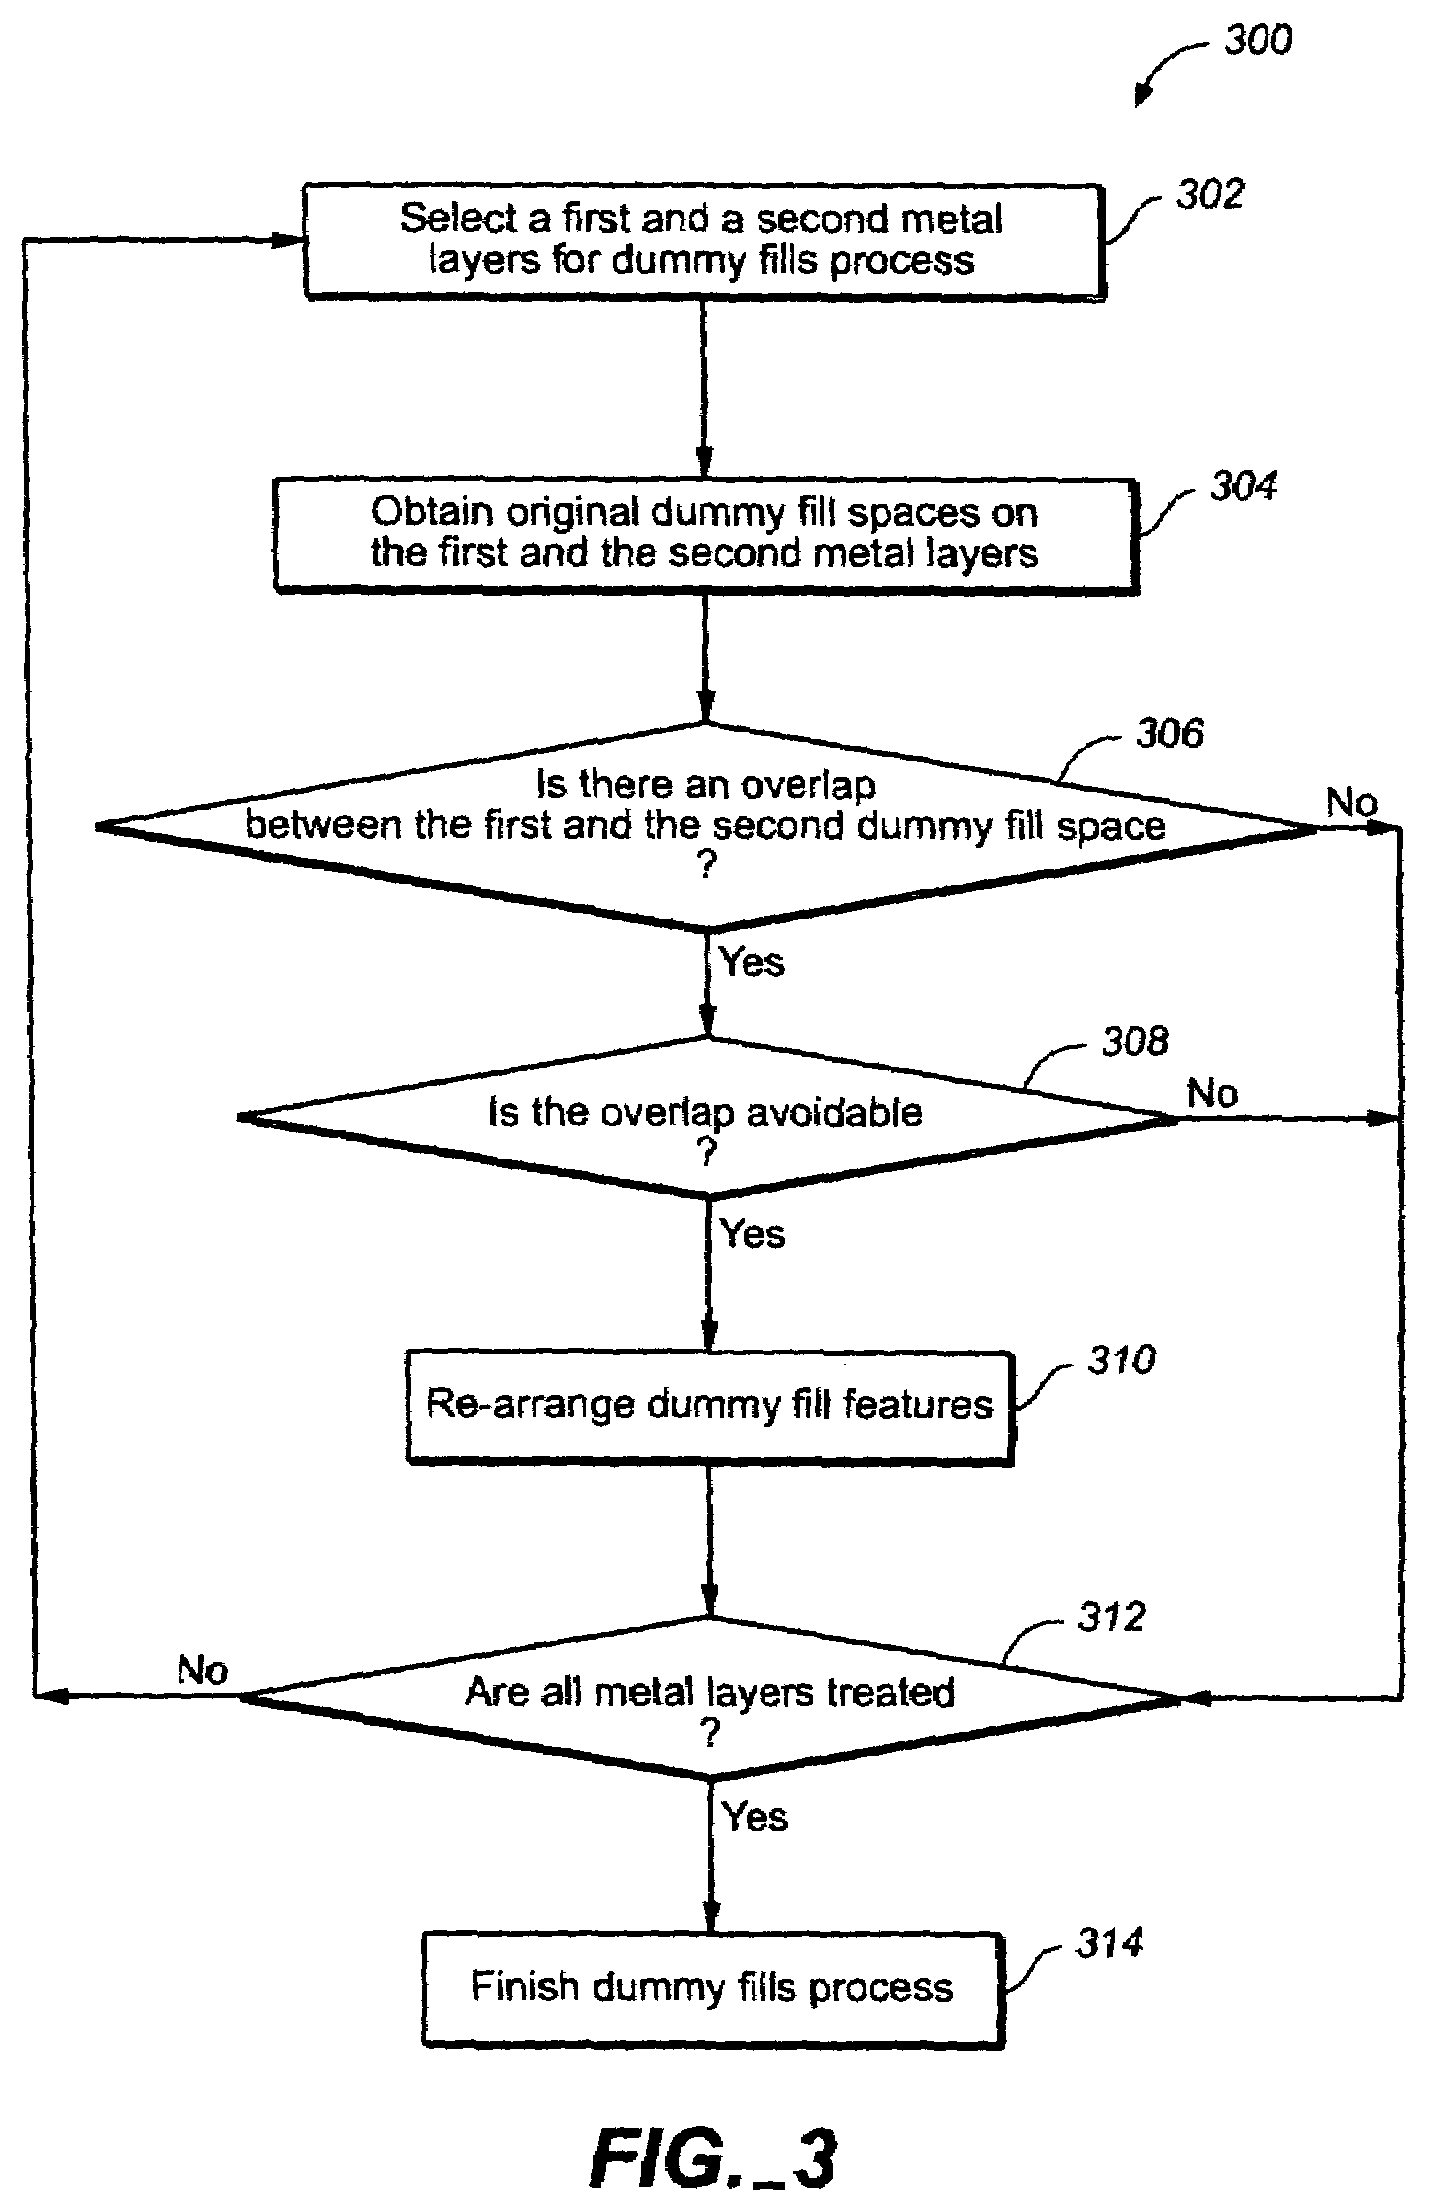 Method and system for reducing inter-layer capacitance in integrated circuits